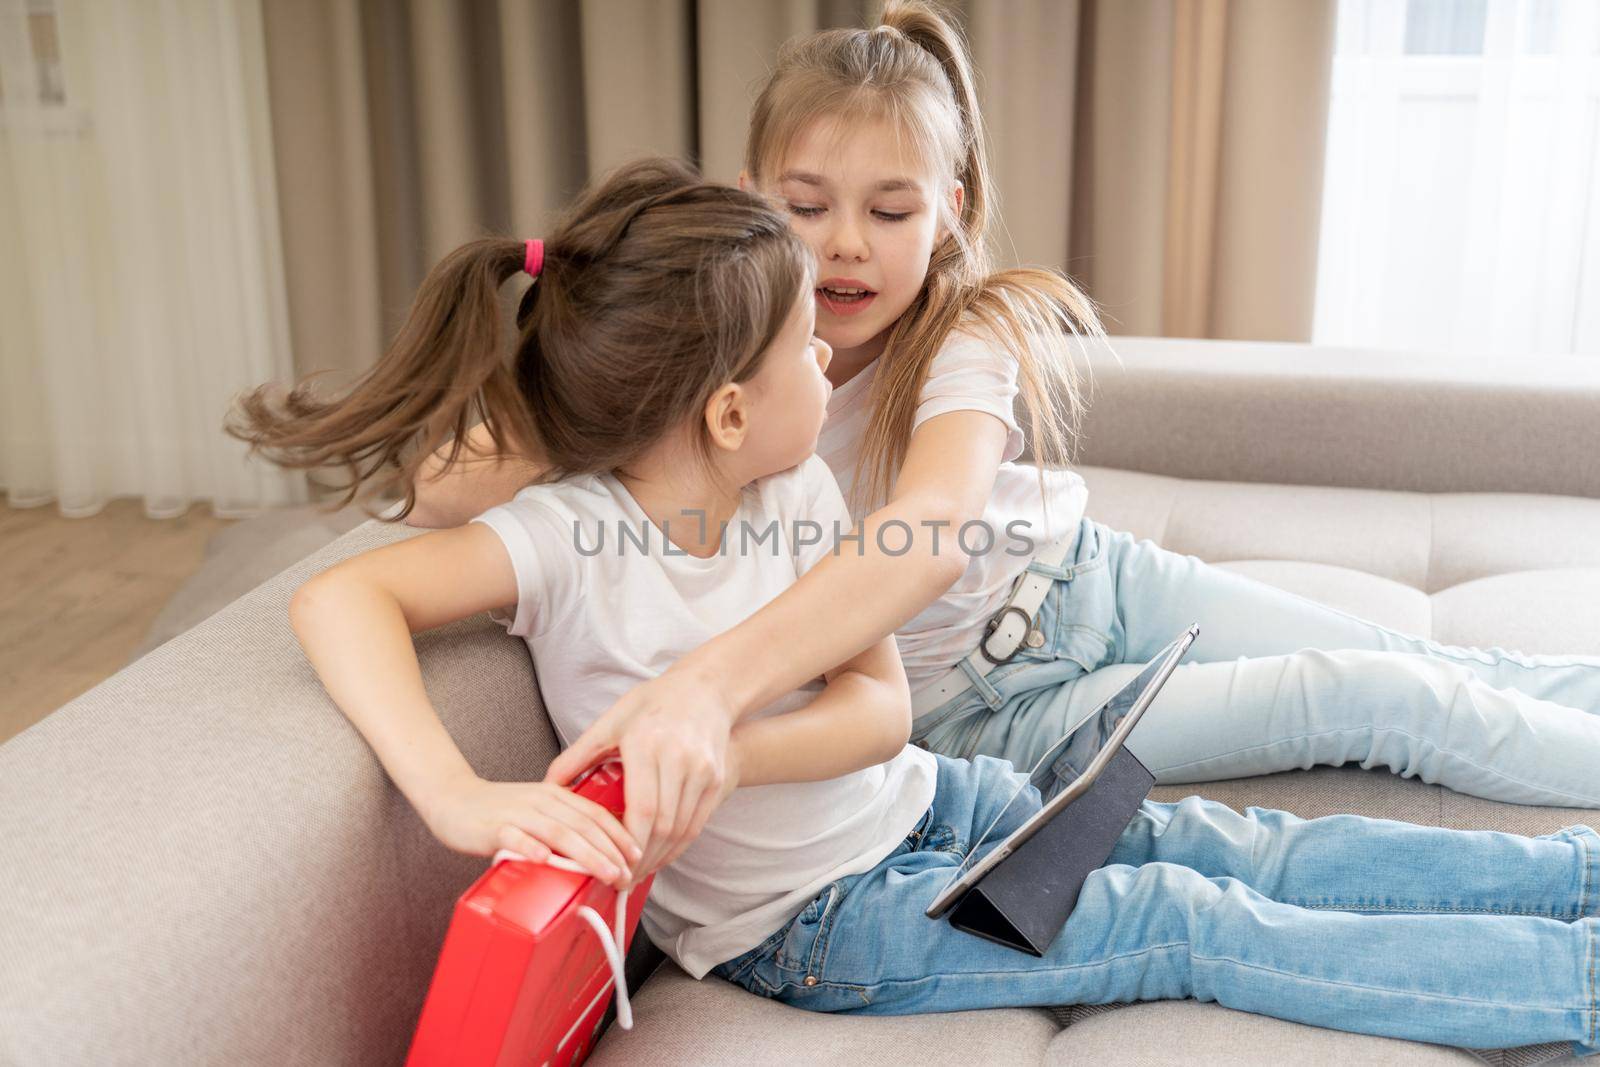 girls fight over present box. Giving present. Birthday present. Gift exchange. Holiday celebration. by Mariakray